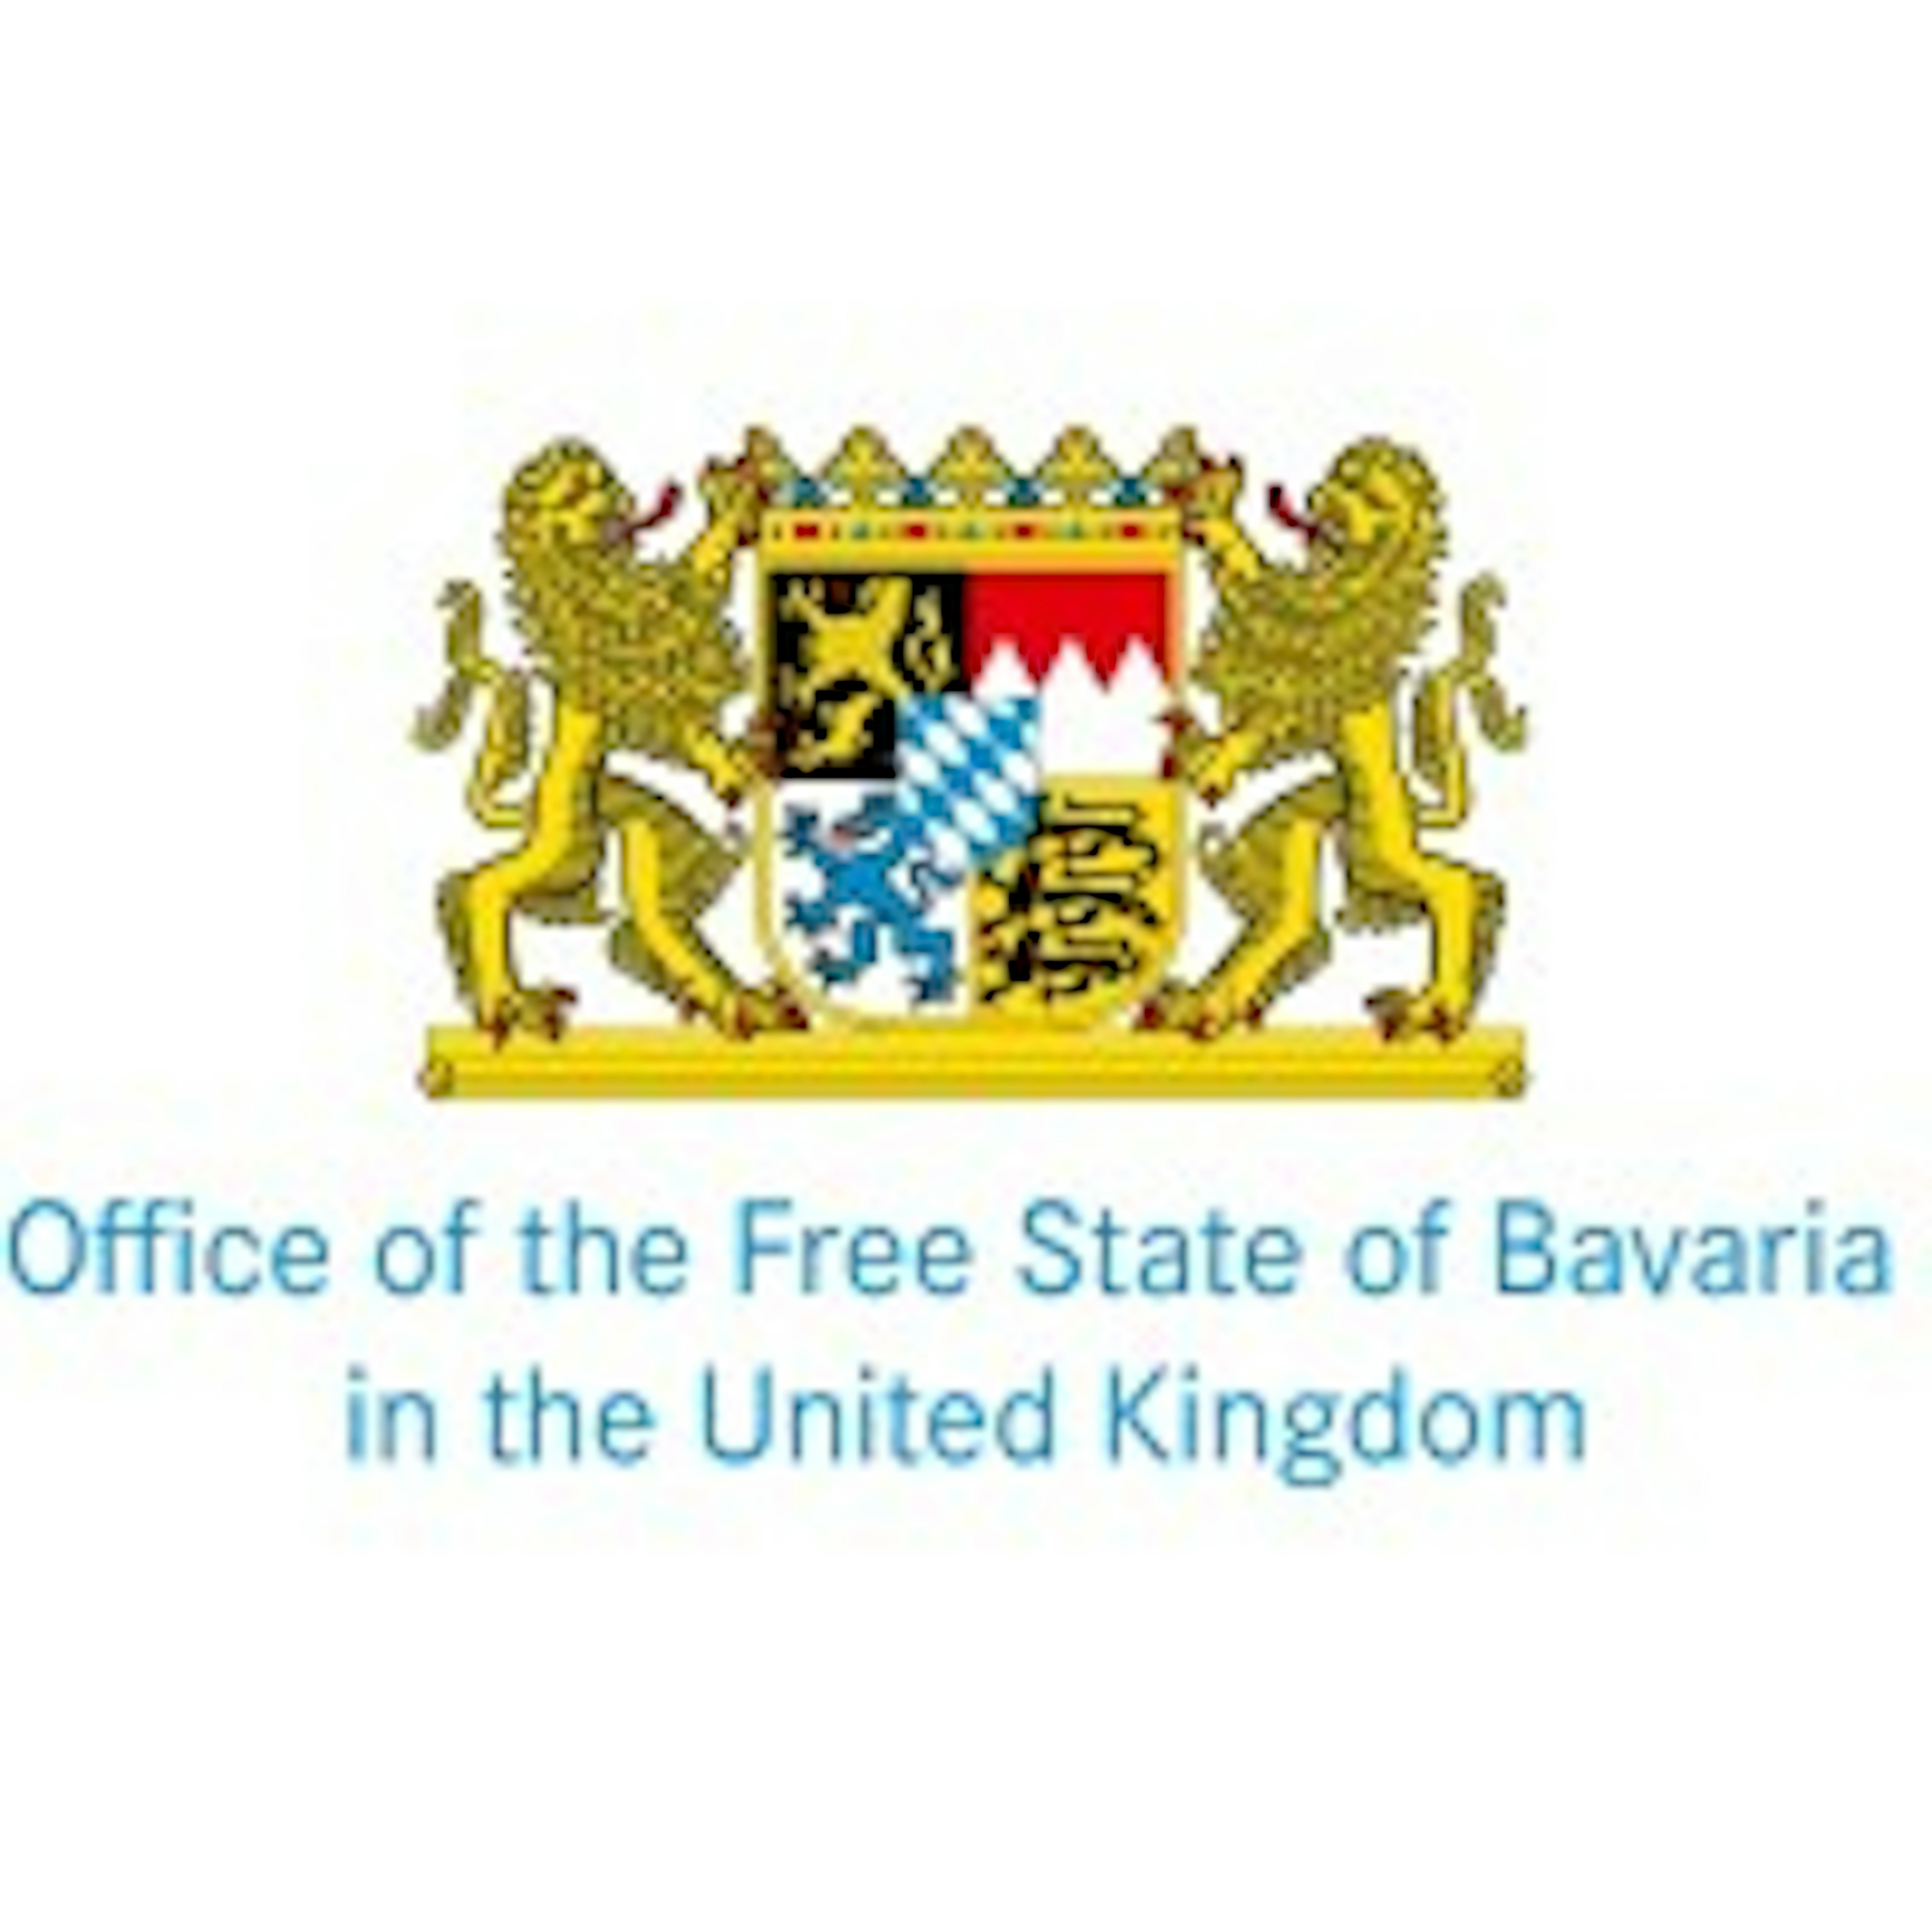 The Office of the Free State of Bavaria